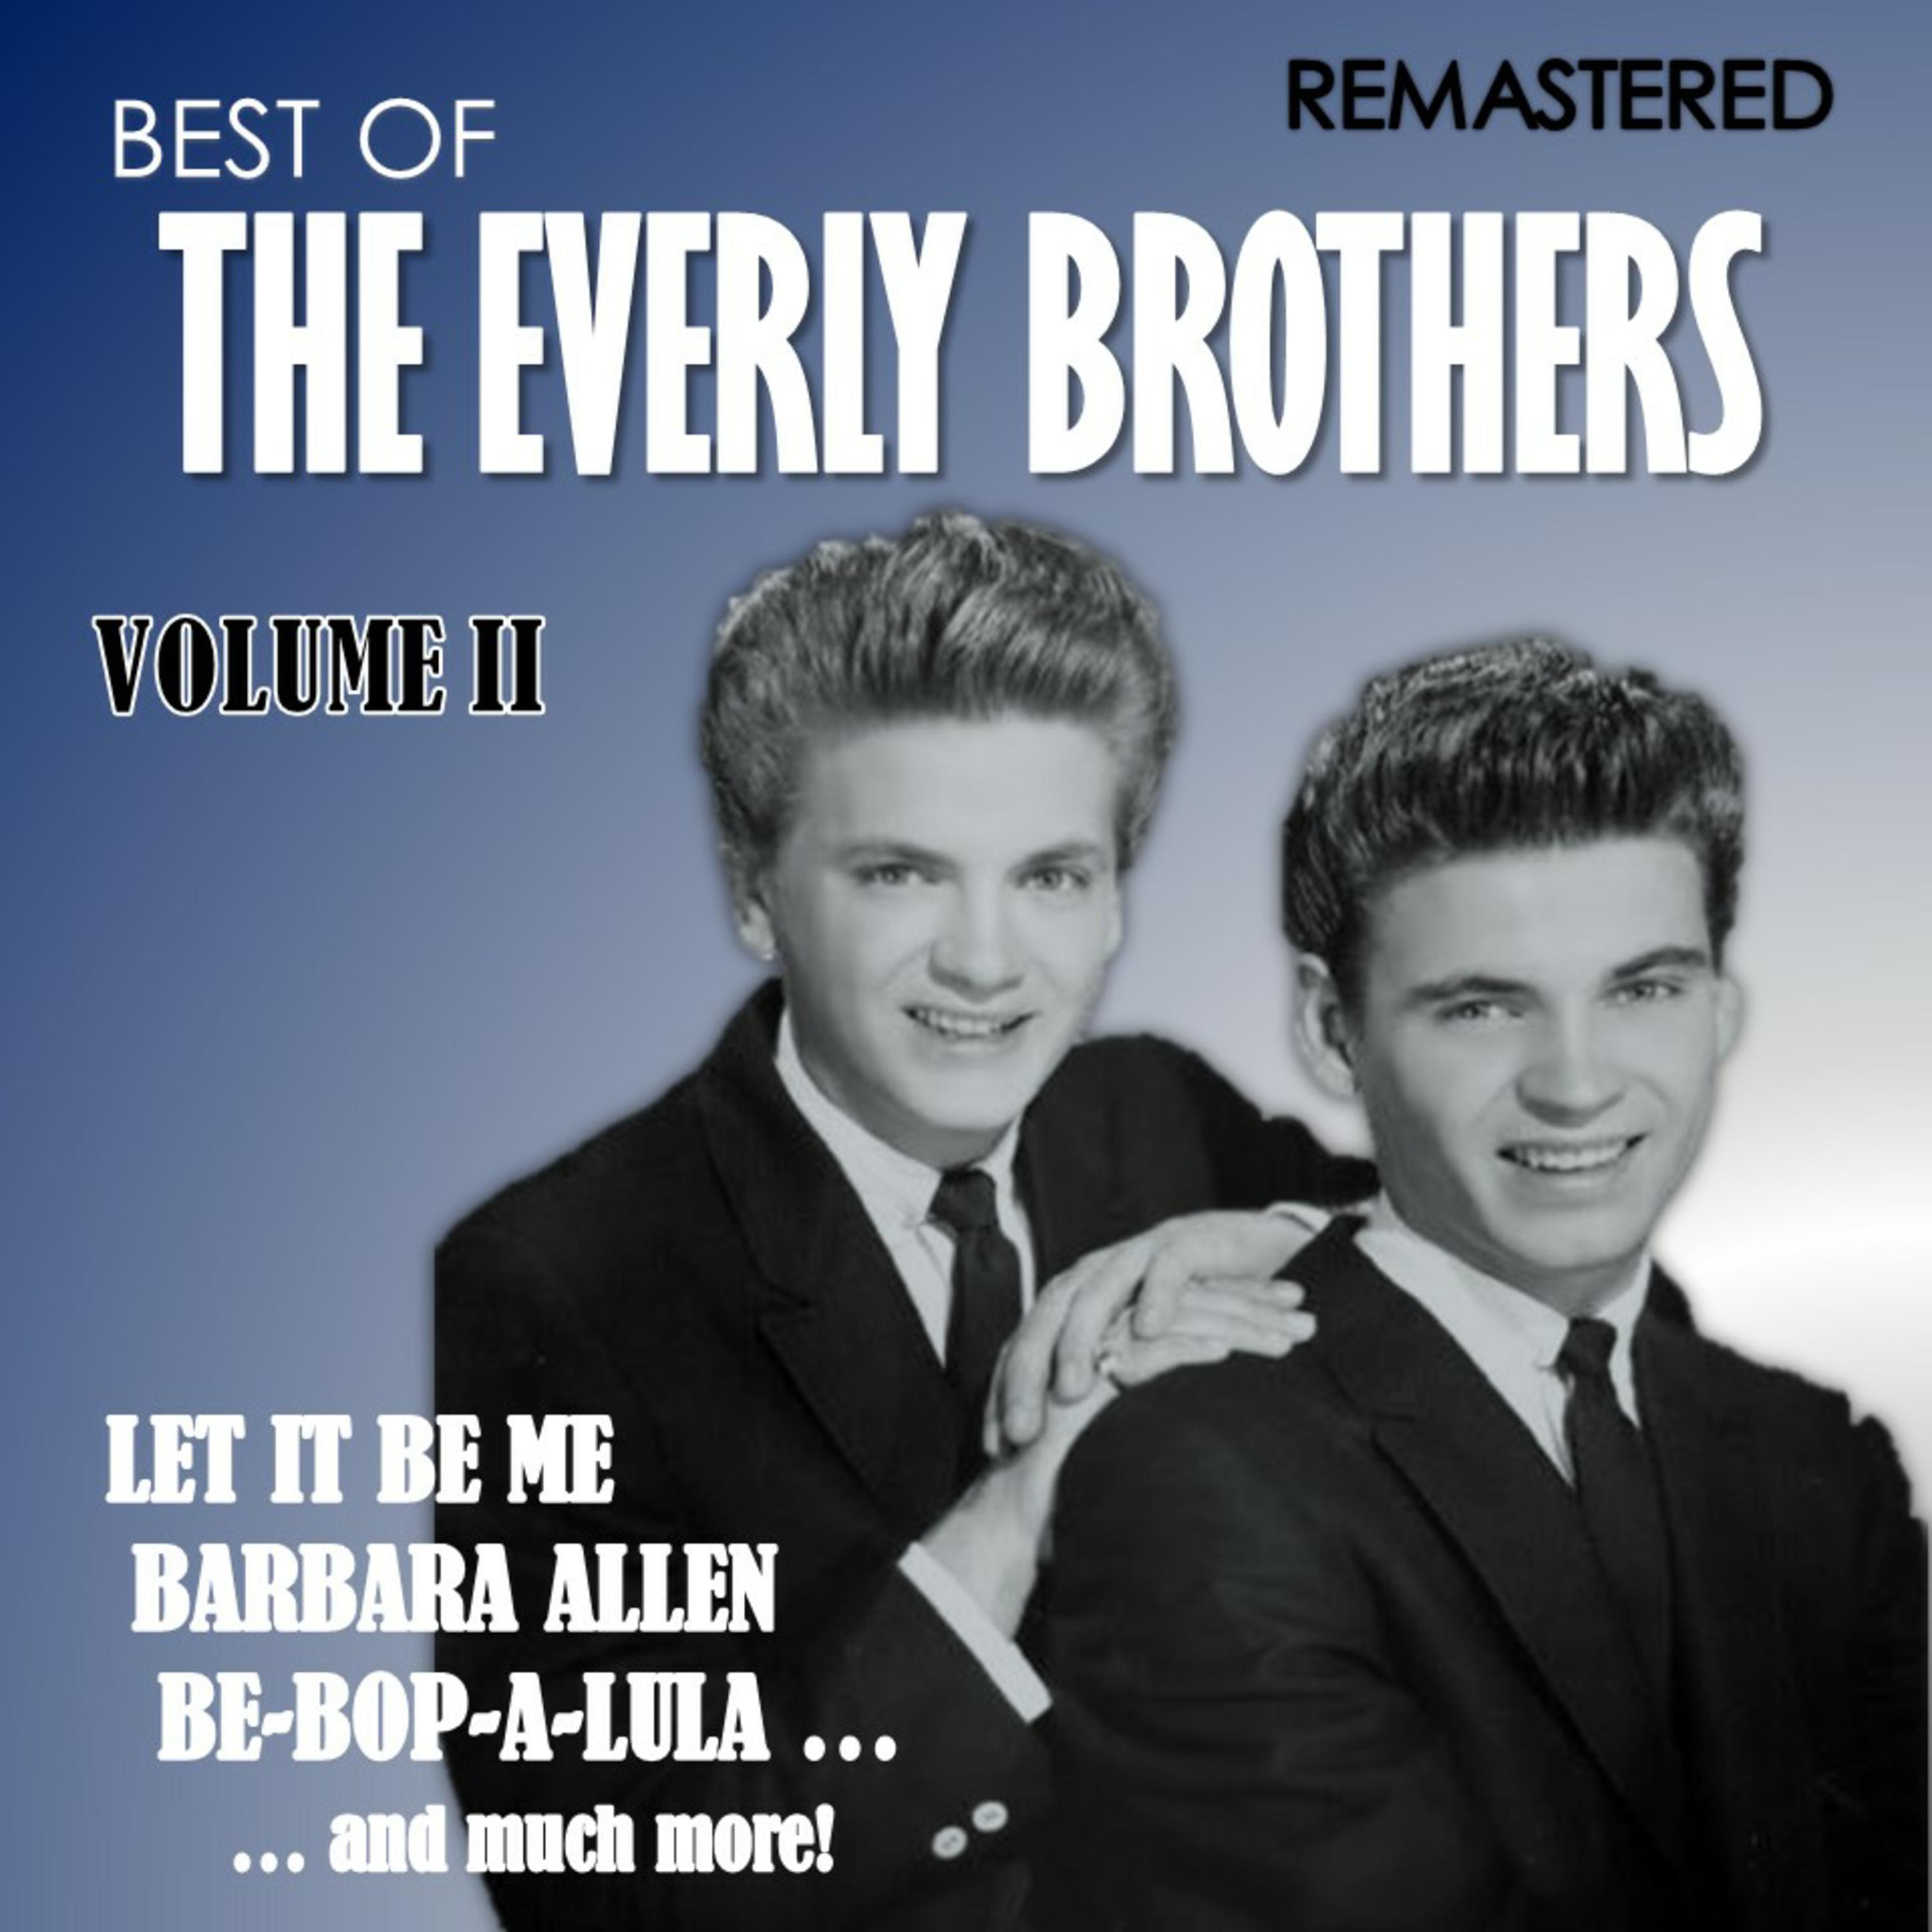 Best of The Everly Brothers, Vol. II (Remastered)